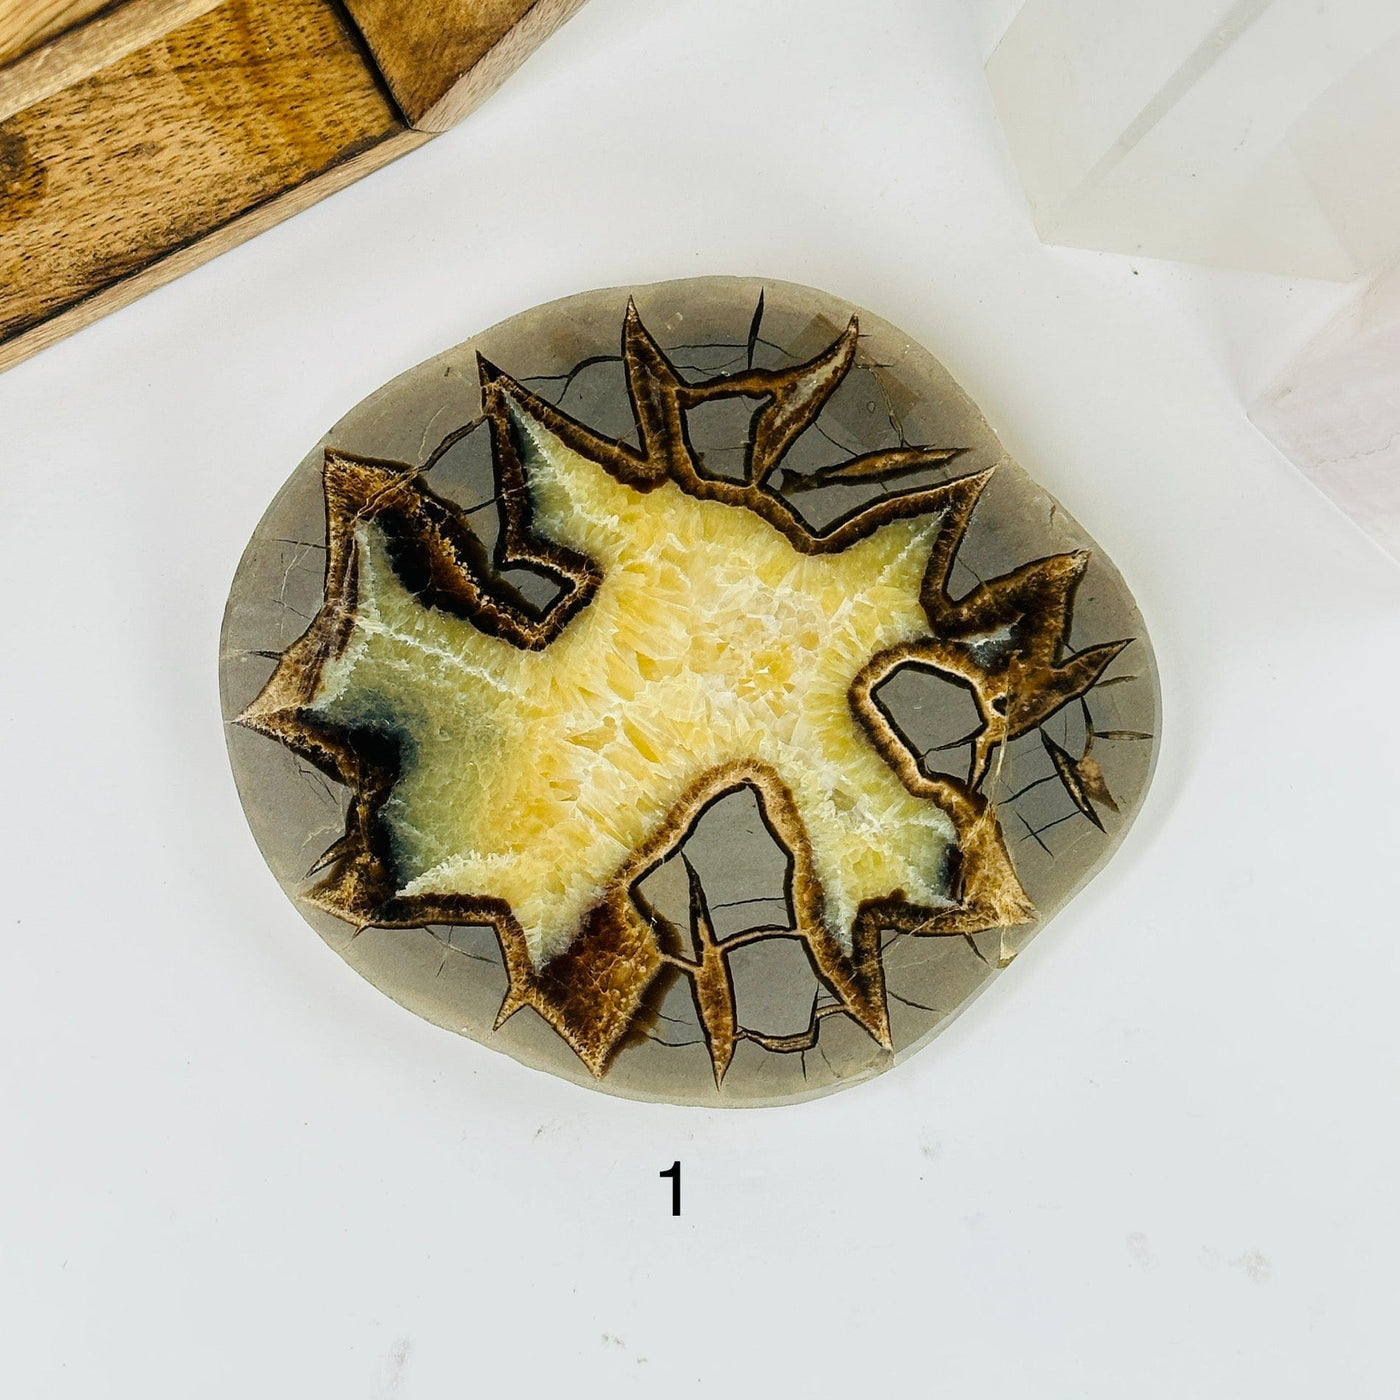 Septarian platter with decorations in the background